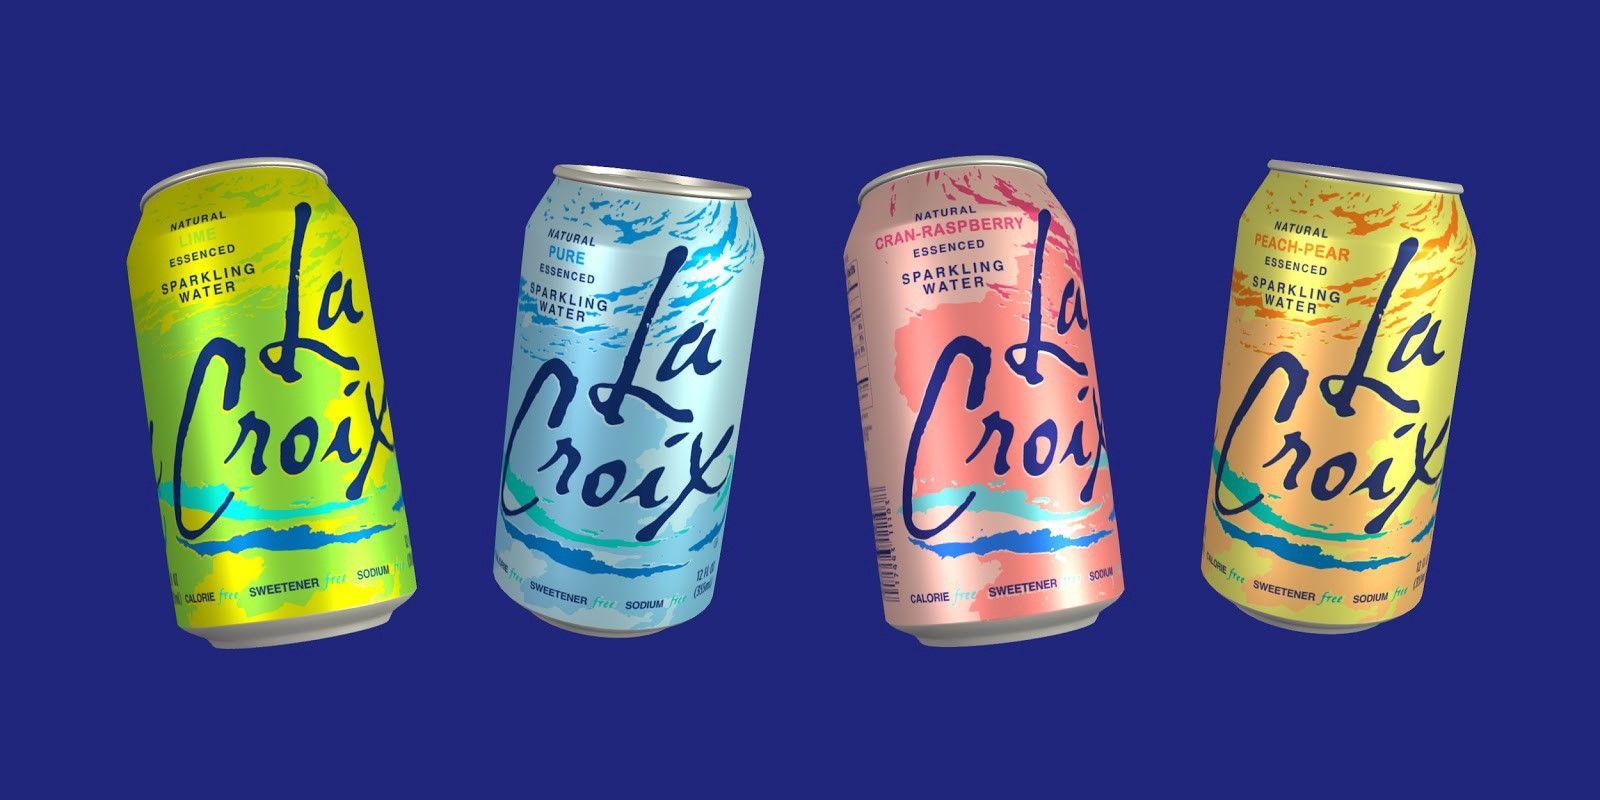 Making the MyLaCroix.com Can